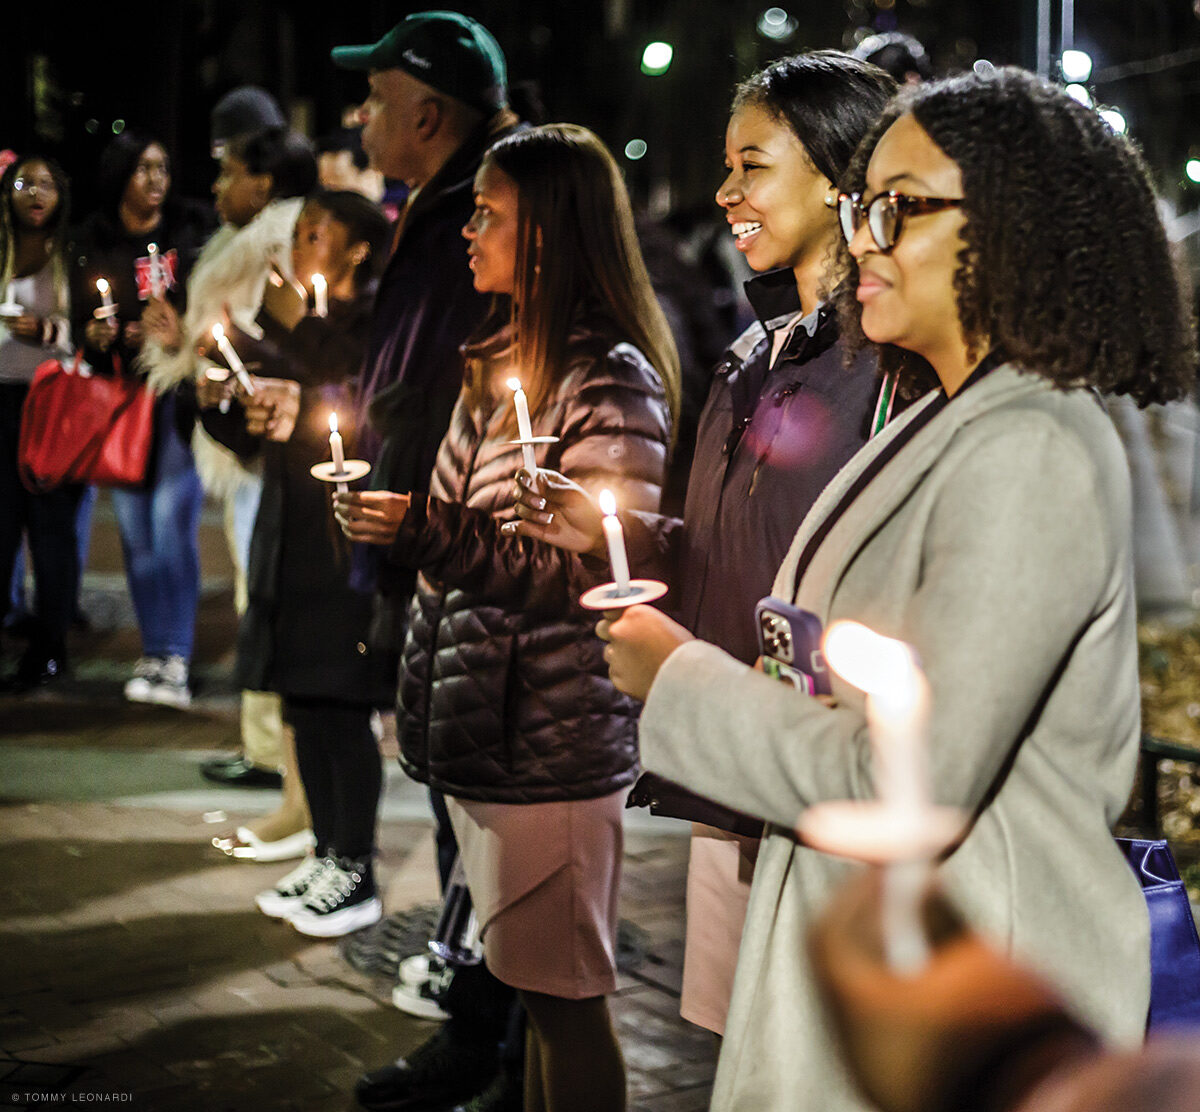 photo of people attending a candlight vigil commemorating Martin Luther King Jr.